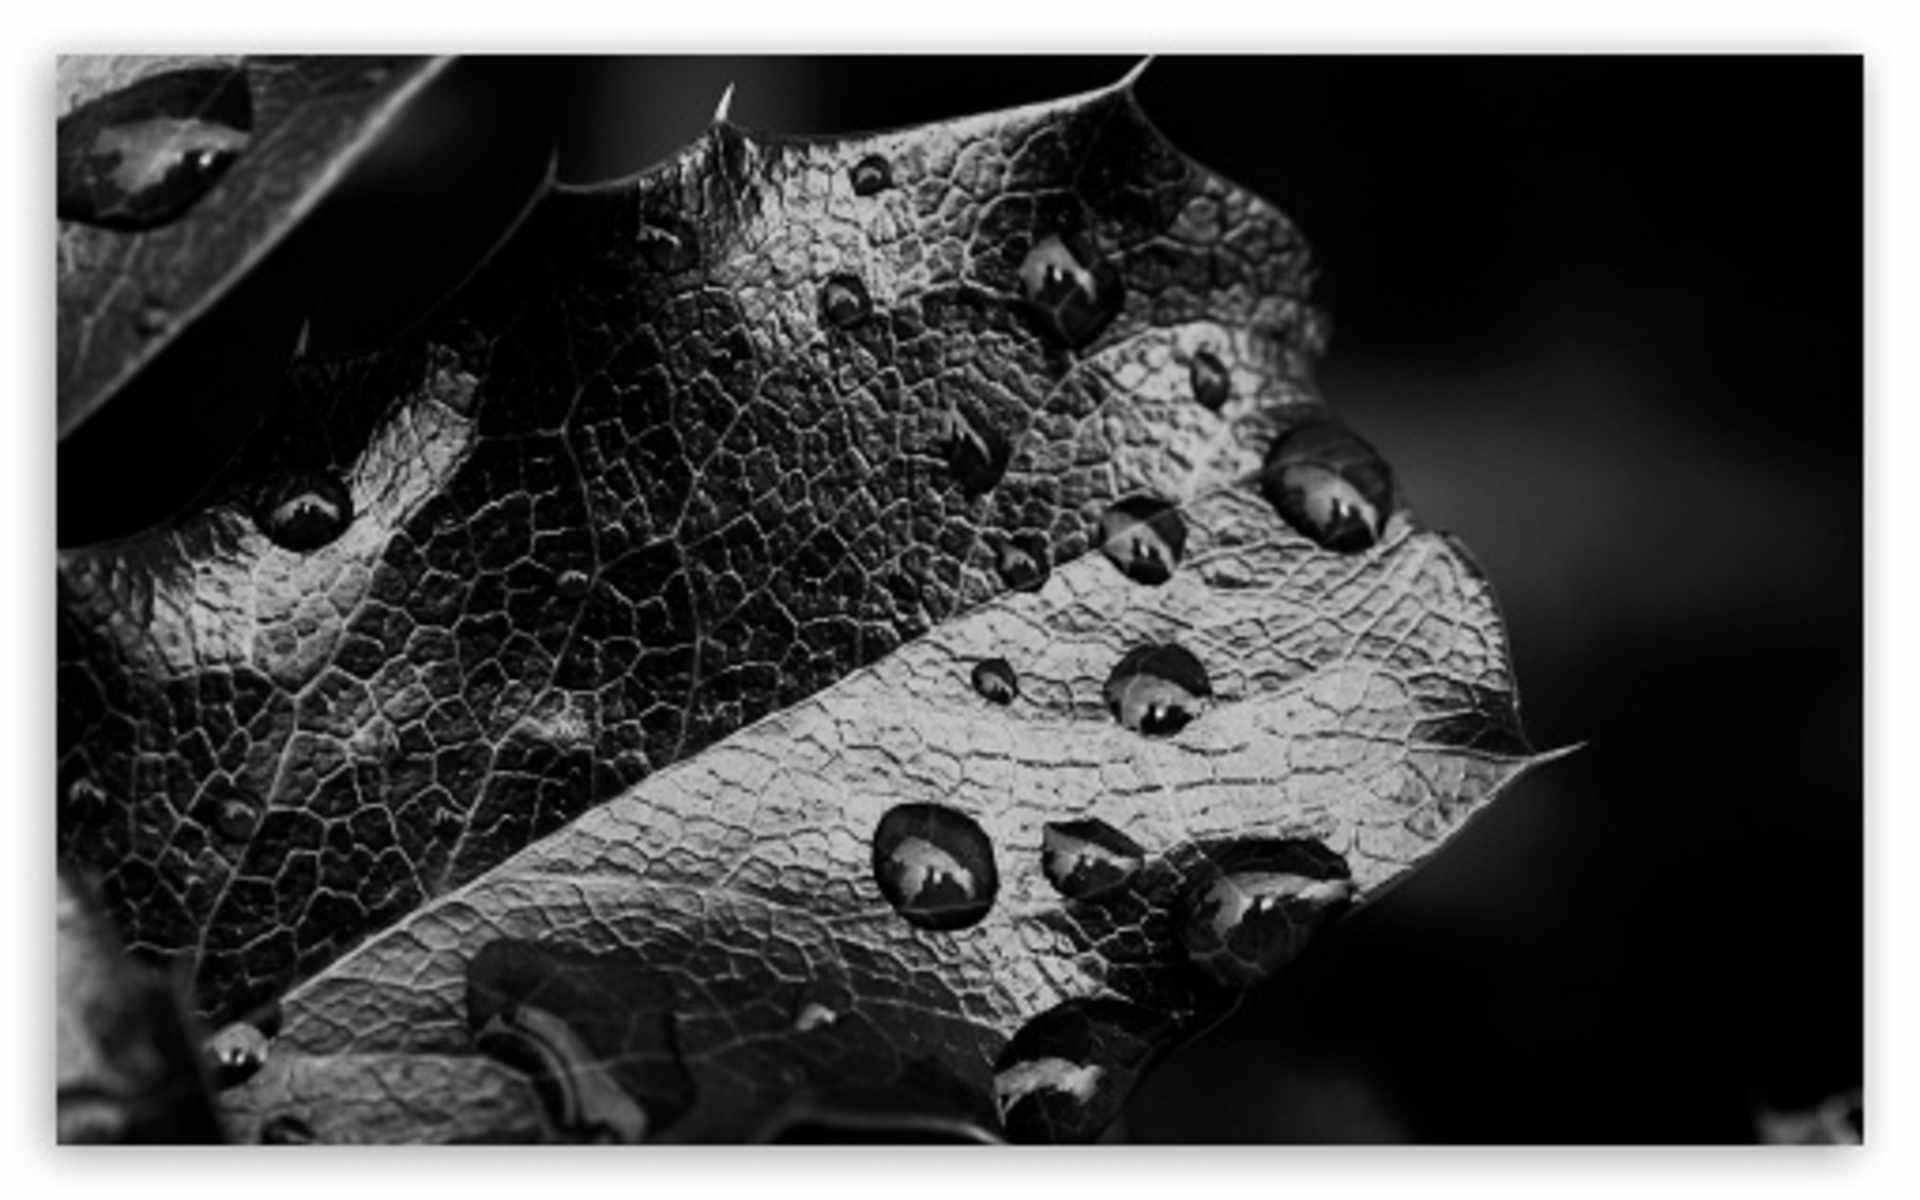 DOWNLOAD: leaf-macro-black-and-white free picture 2560 x 1600